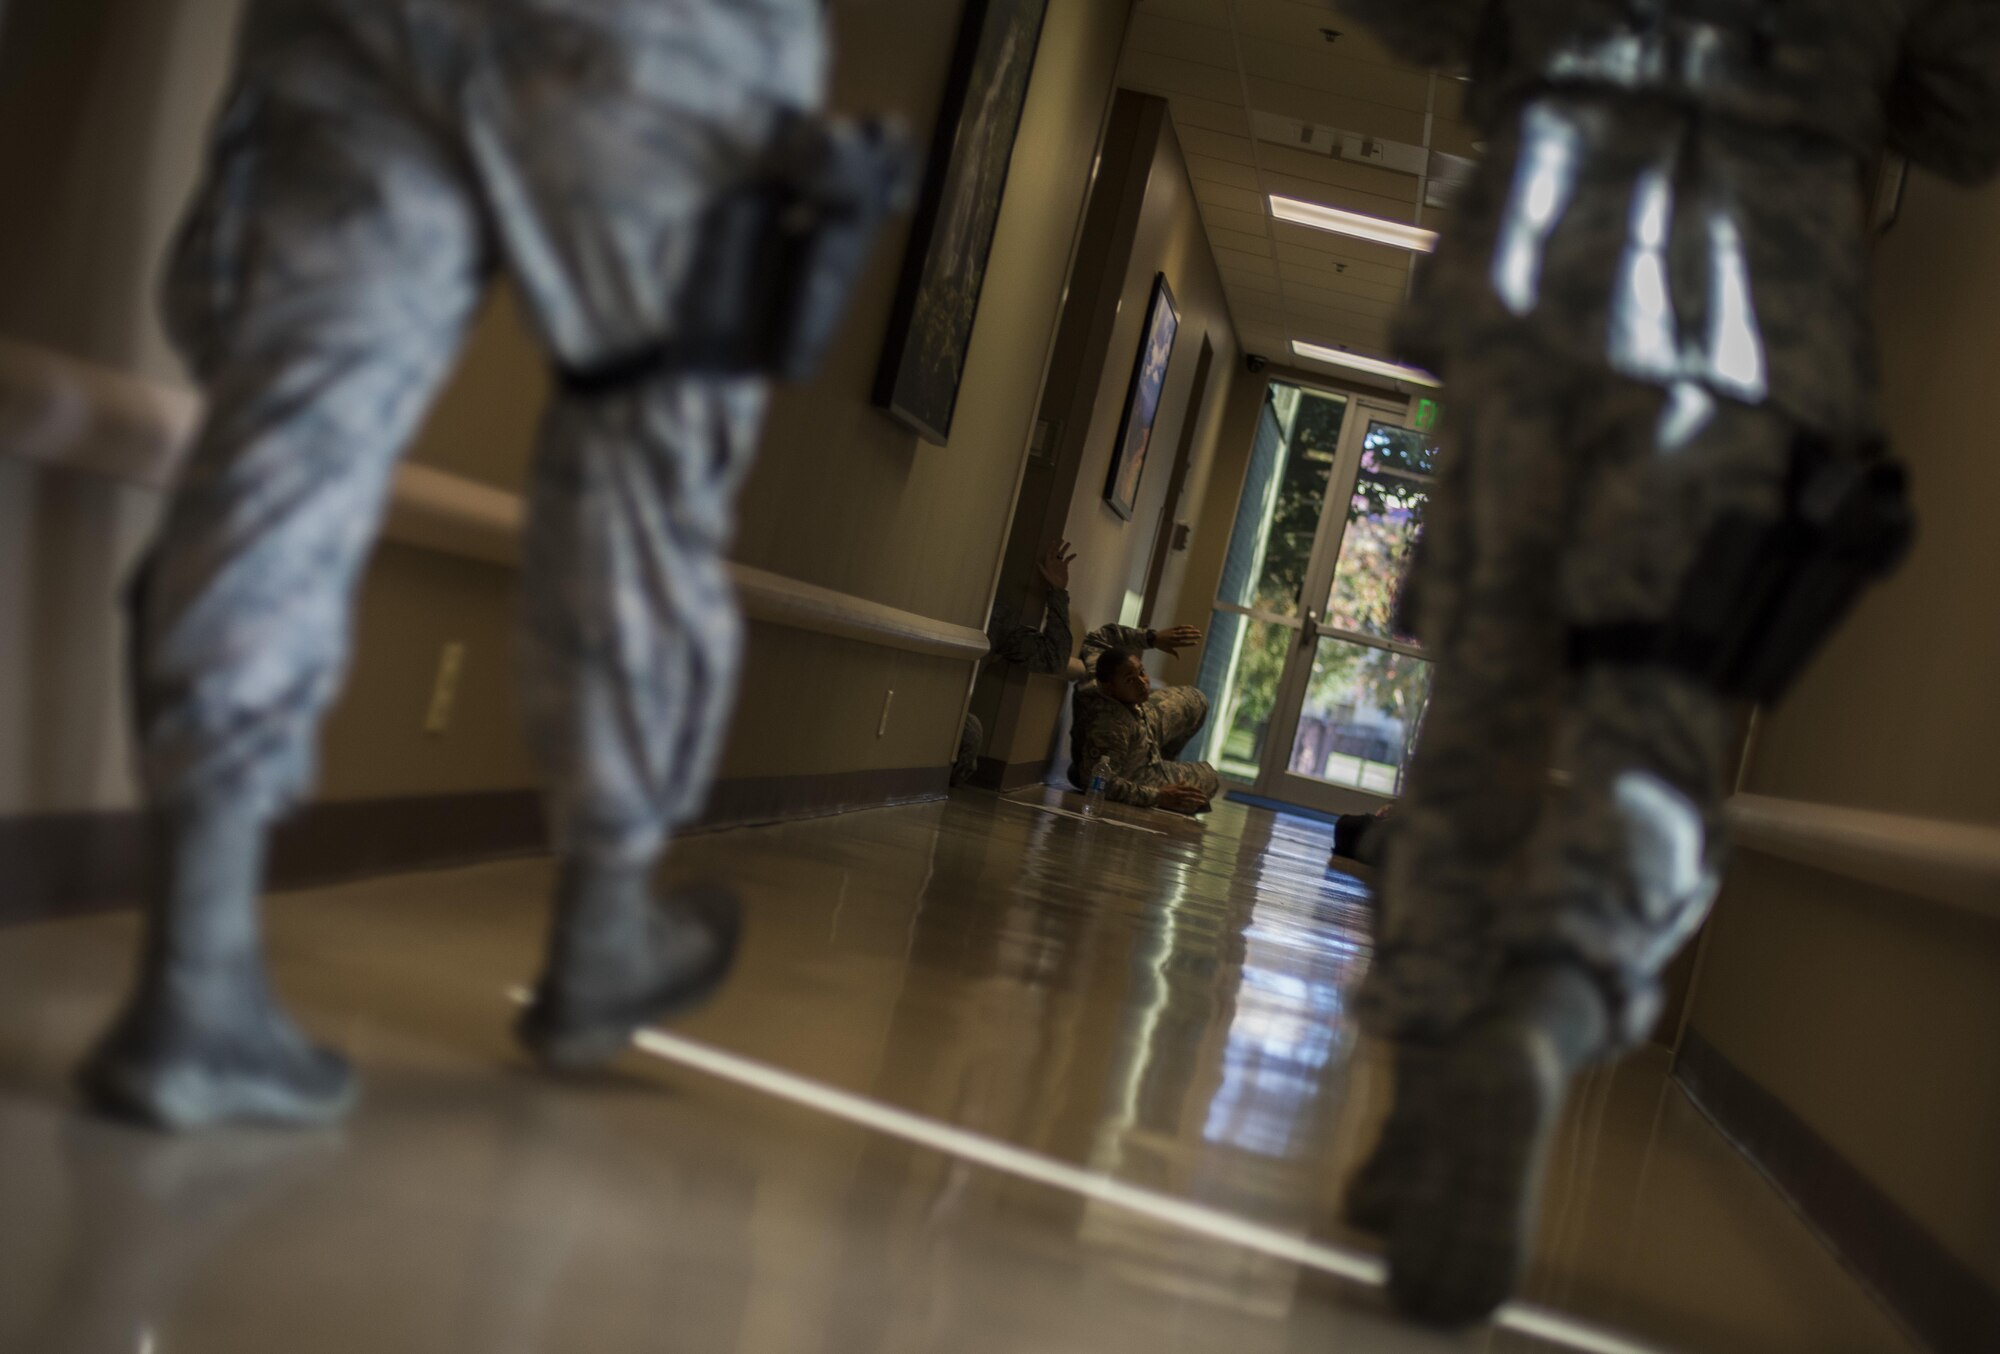 Members of the 2nd Security Forces Squadron search a building for victims and potential threats during an active shooter exercise at Barksdale Air Force Base, La., Nov. 29, 2016. This exercise tested the base's emergency management core capabilities as well as shelter in place and lock down procedures. (U.S. Air Force photo/Senior Airman Damon Kasberg)